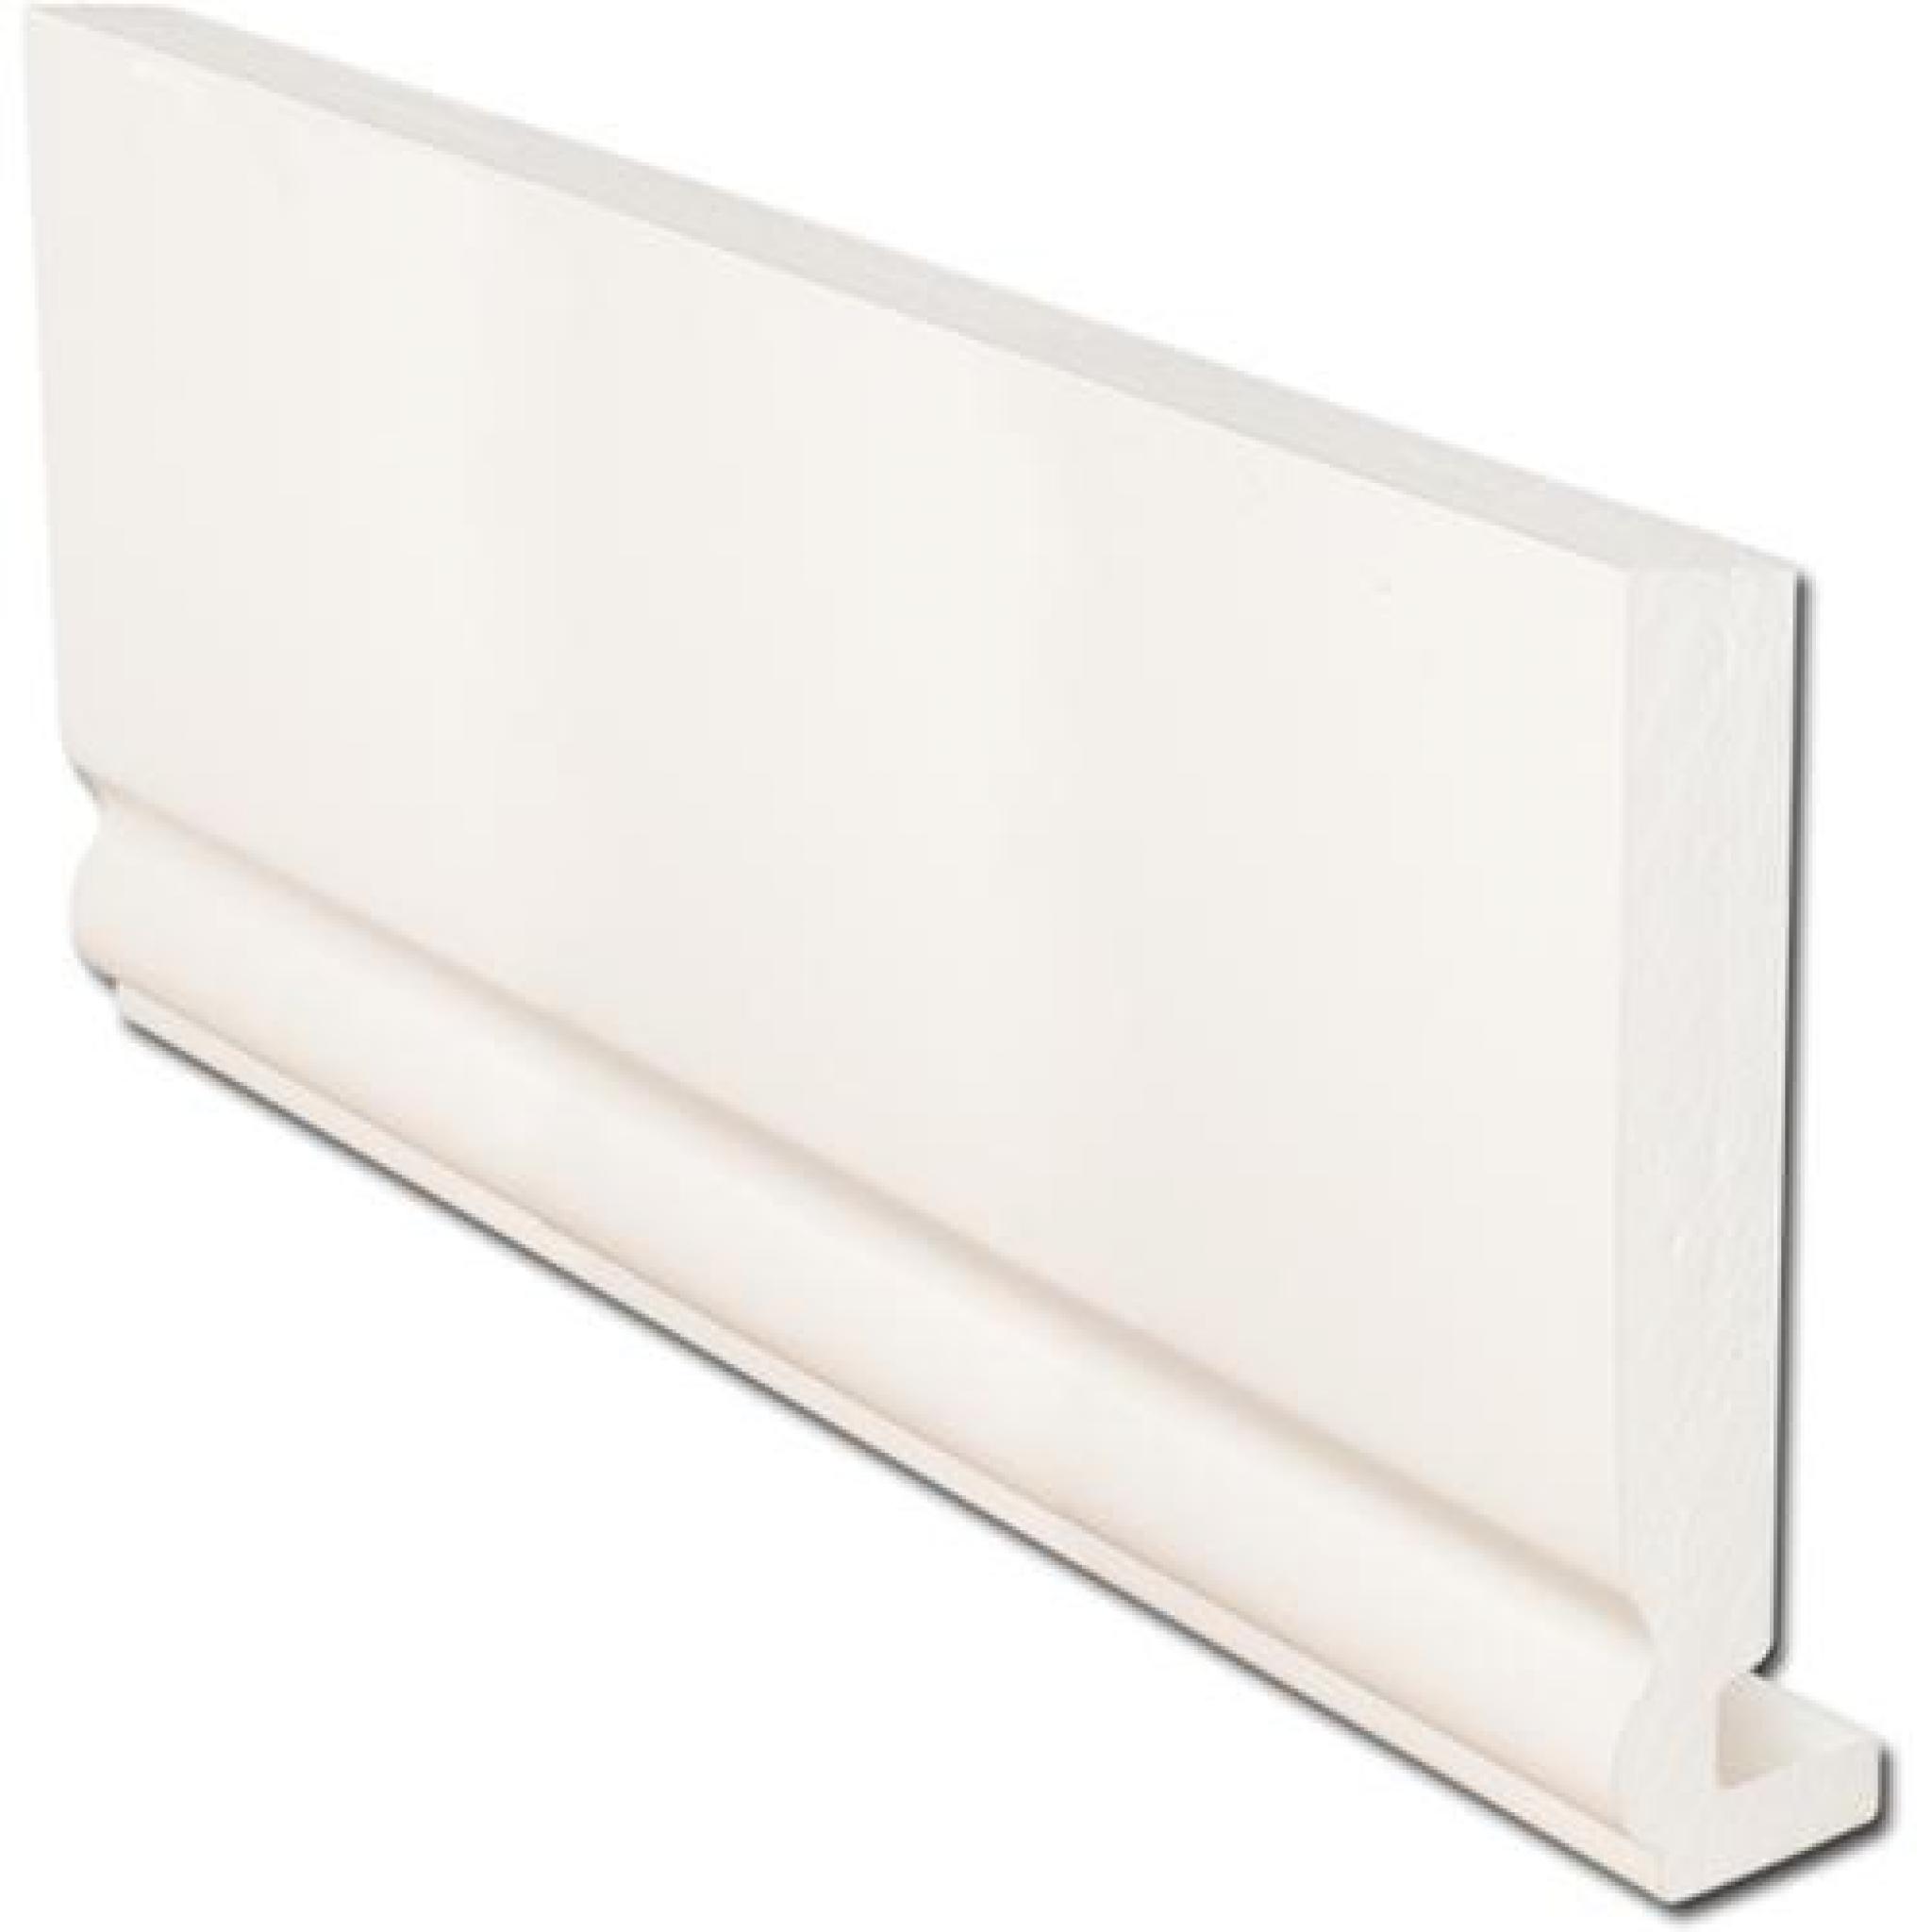 White Ogee Replacement Fascia Boards 16mm x 5mtr